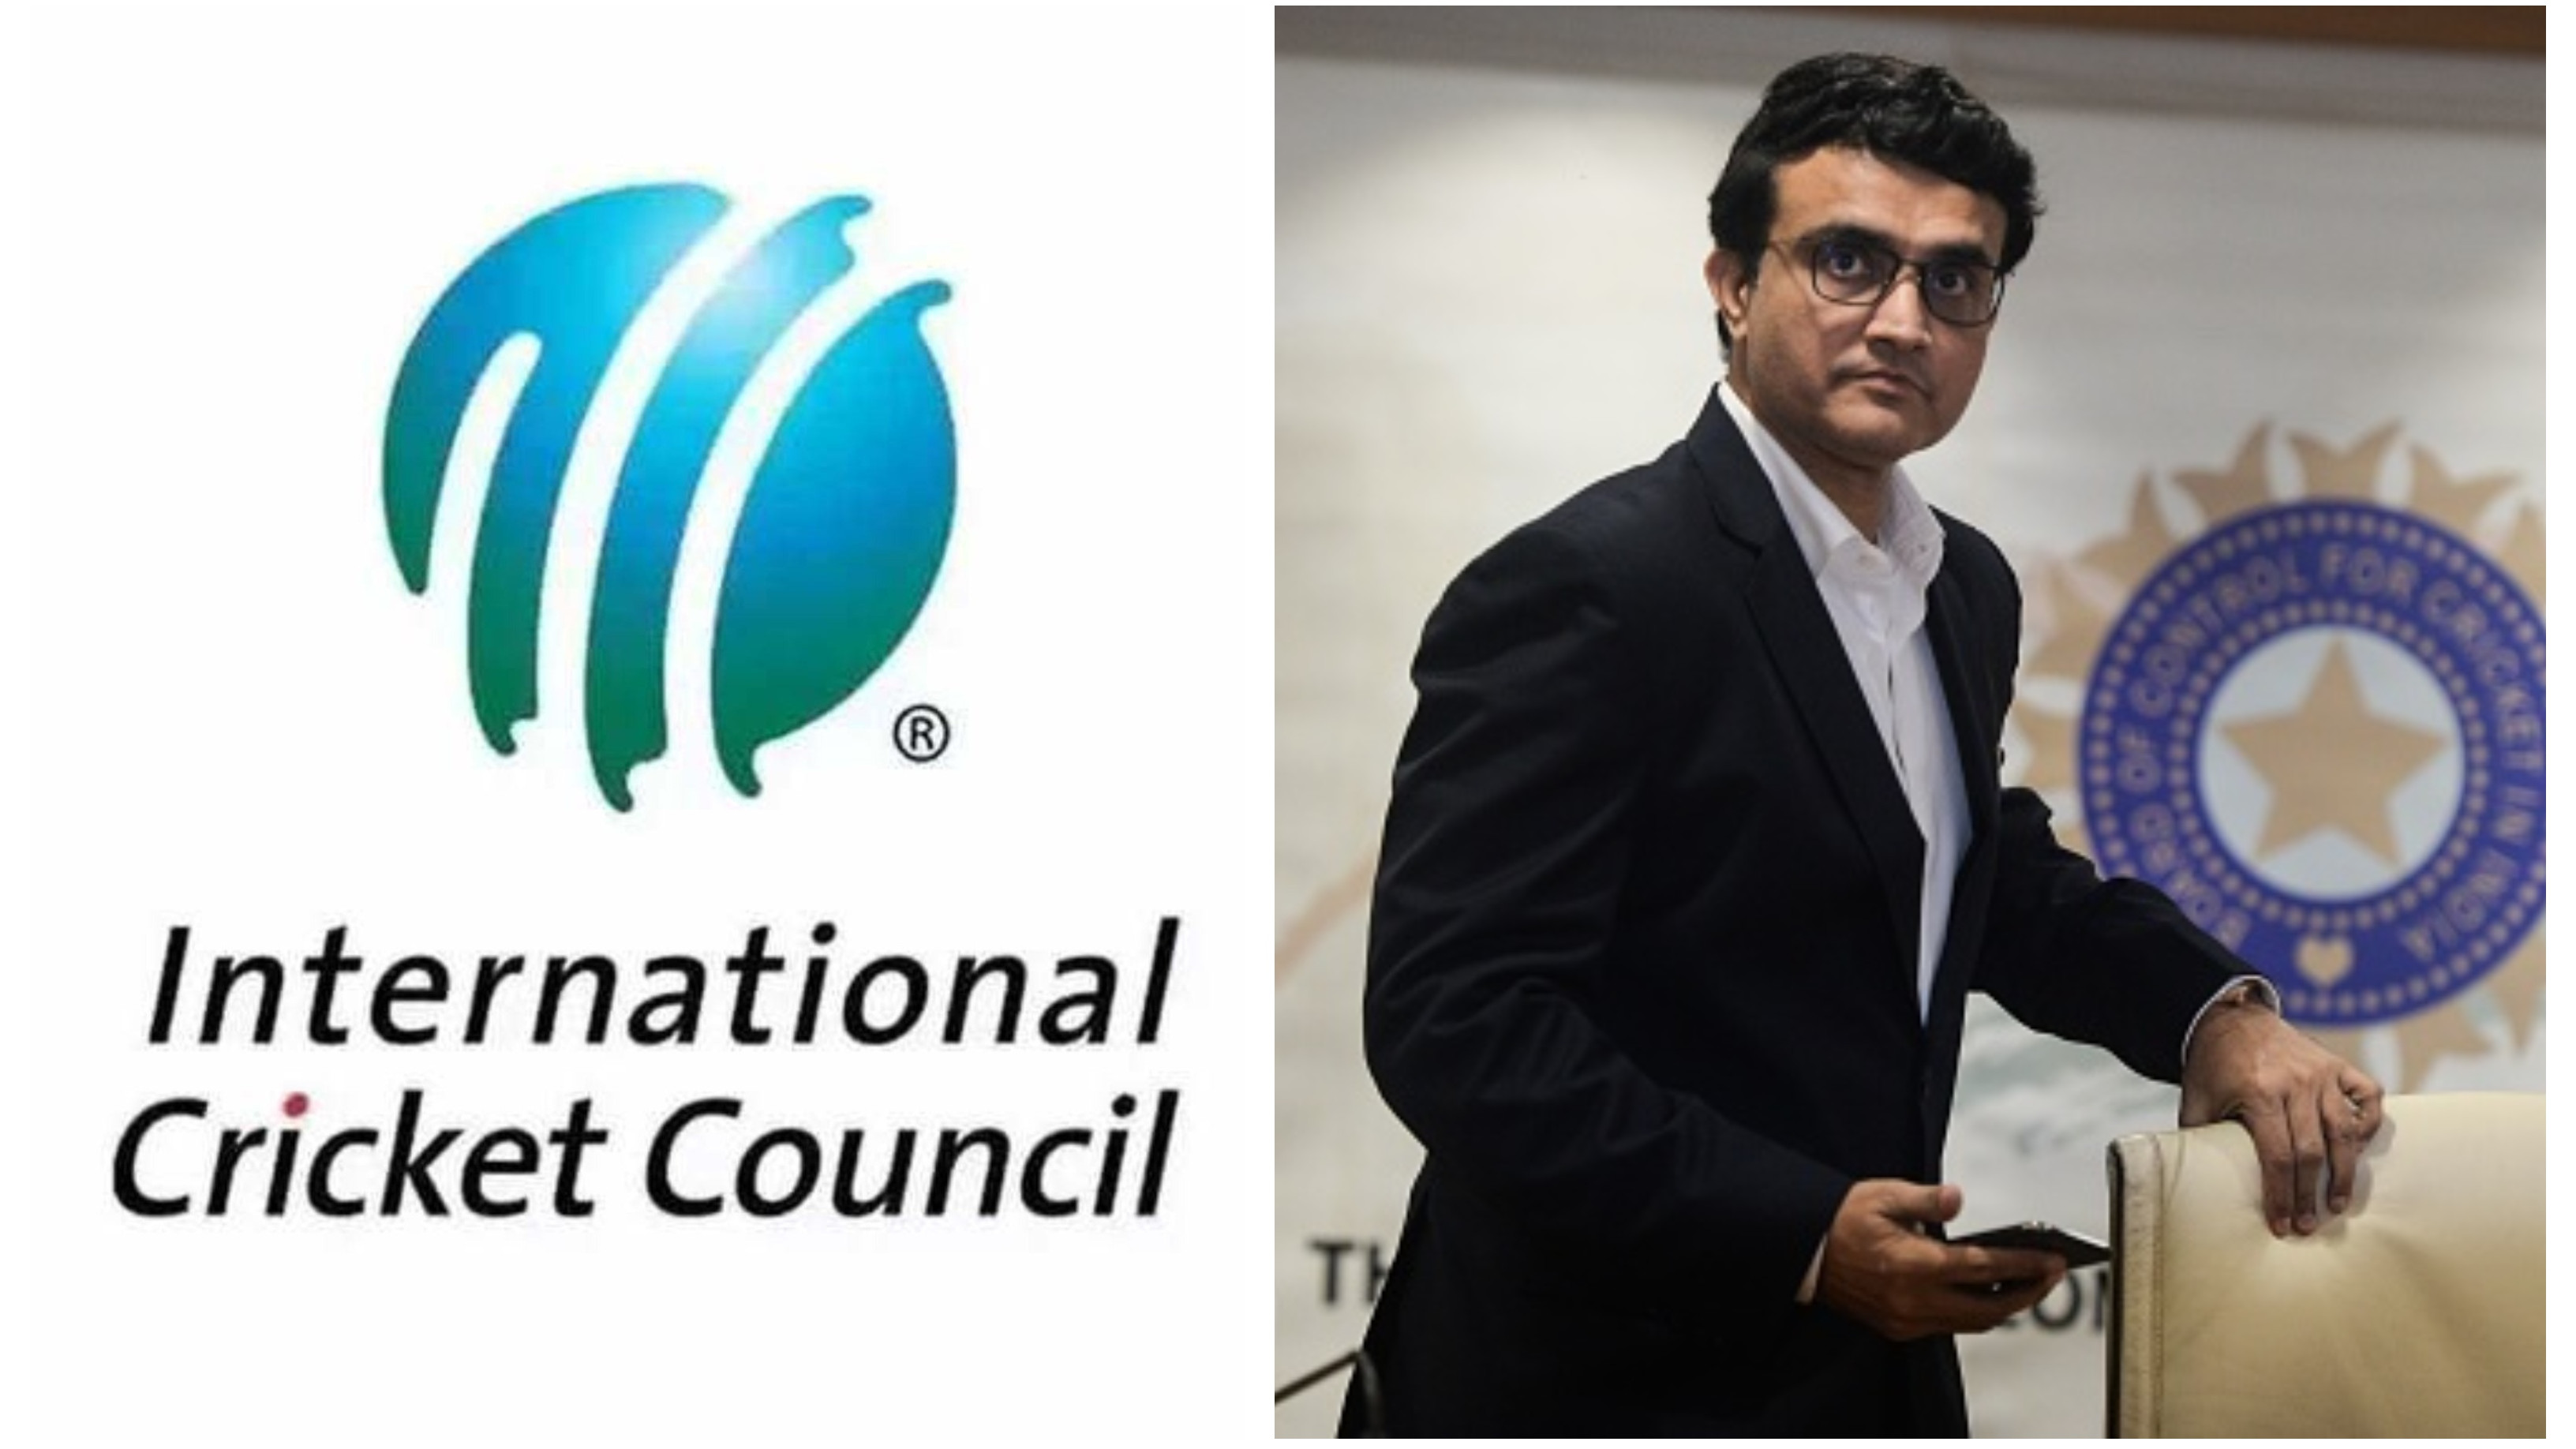 Ganguly replaces Kumble as chair of ICC Cricket Committee; ODI Super League to be discontinued